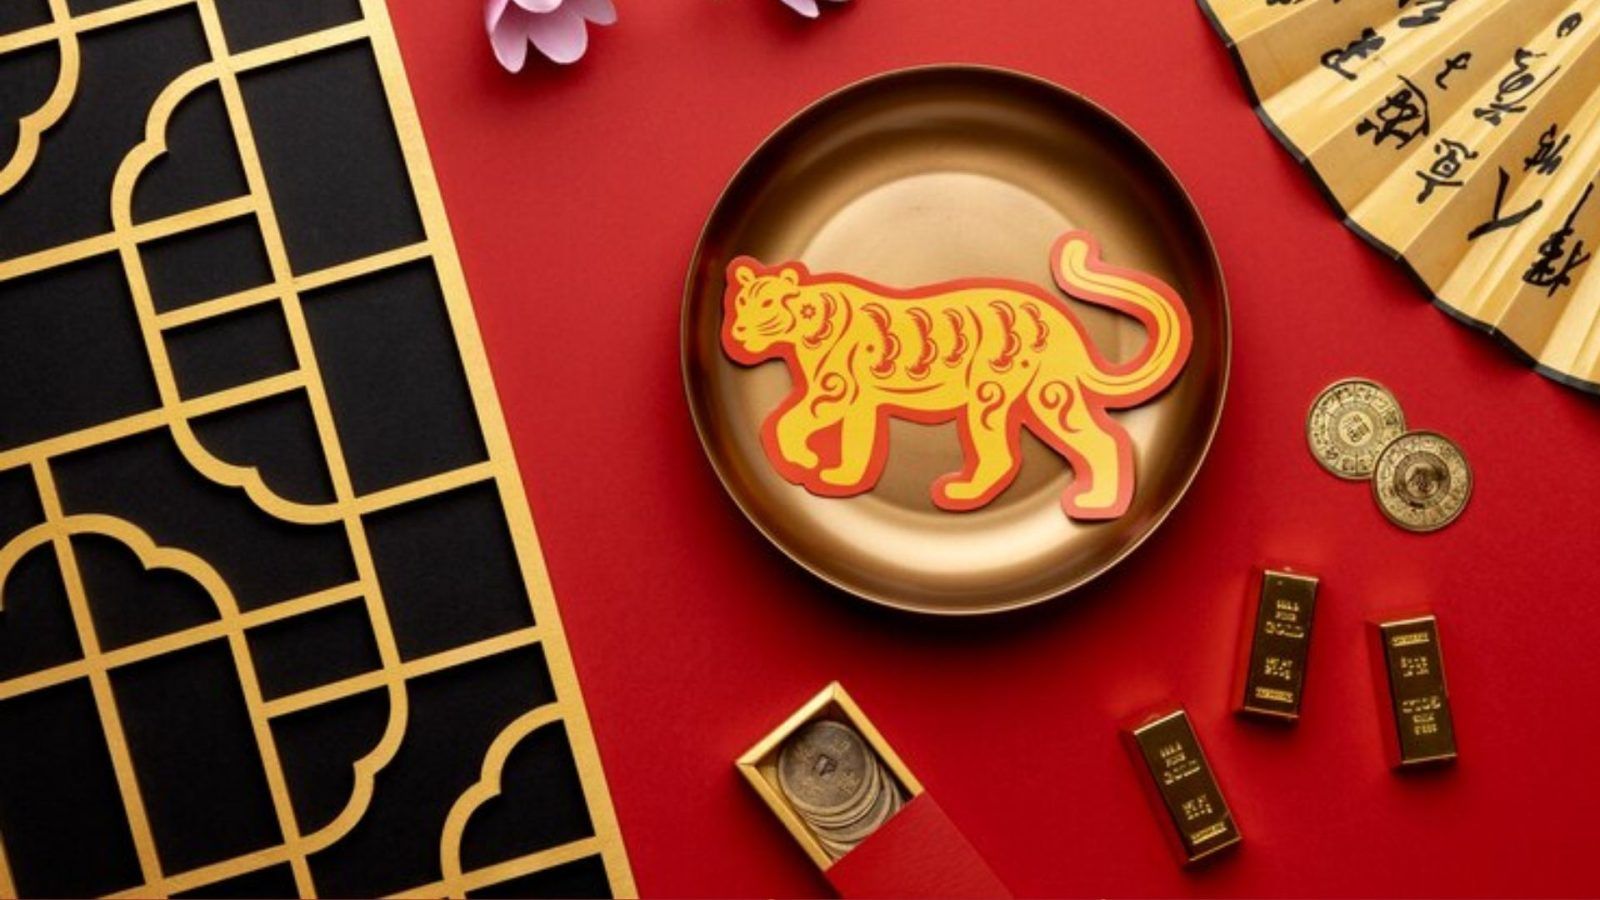 Surprising facts about the Chinese zodiac we bet you didn’t know!